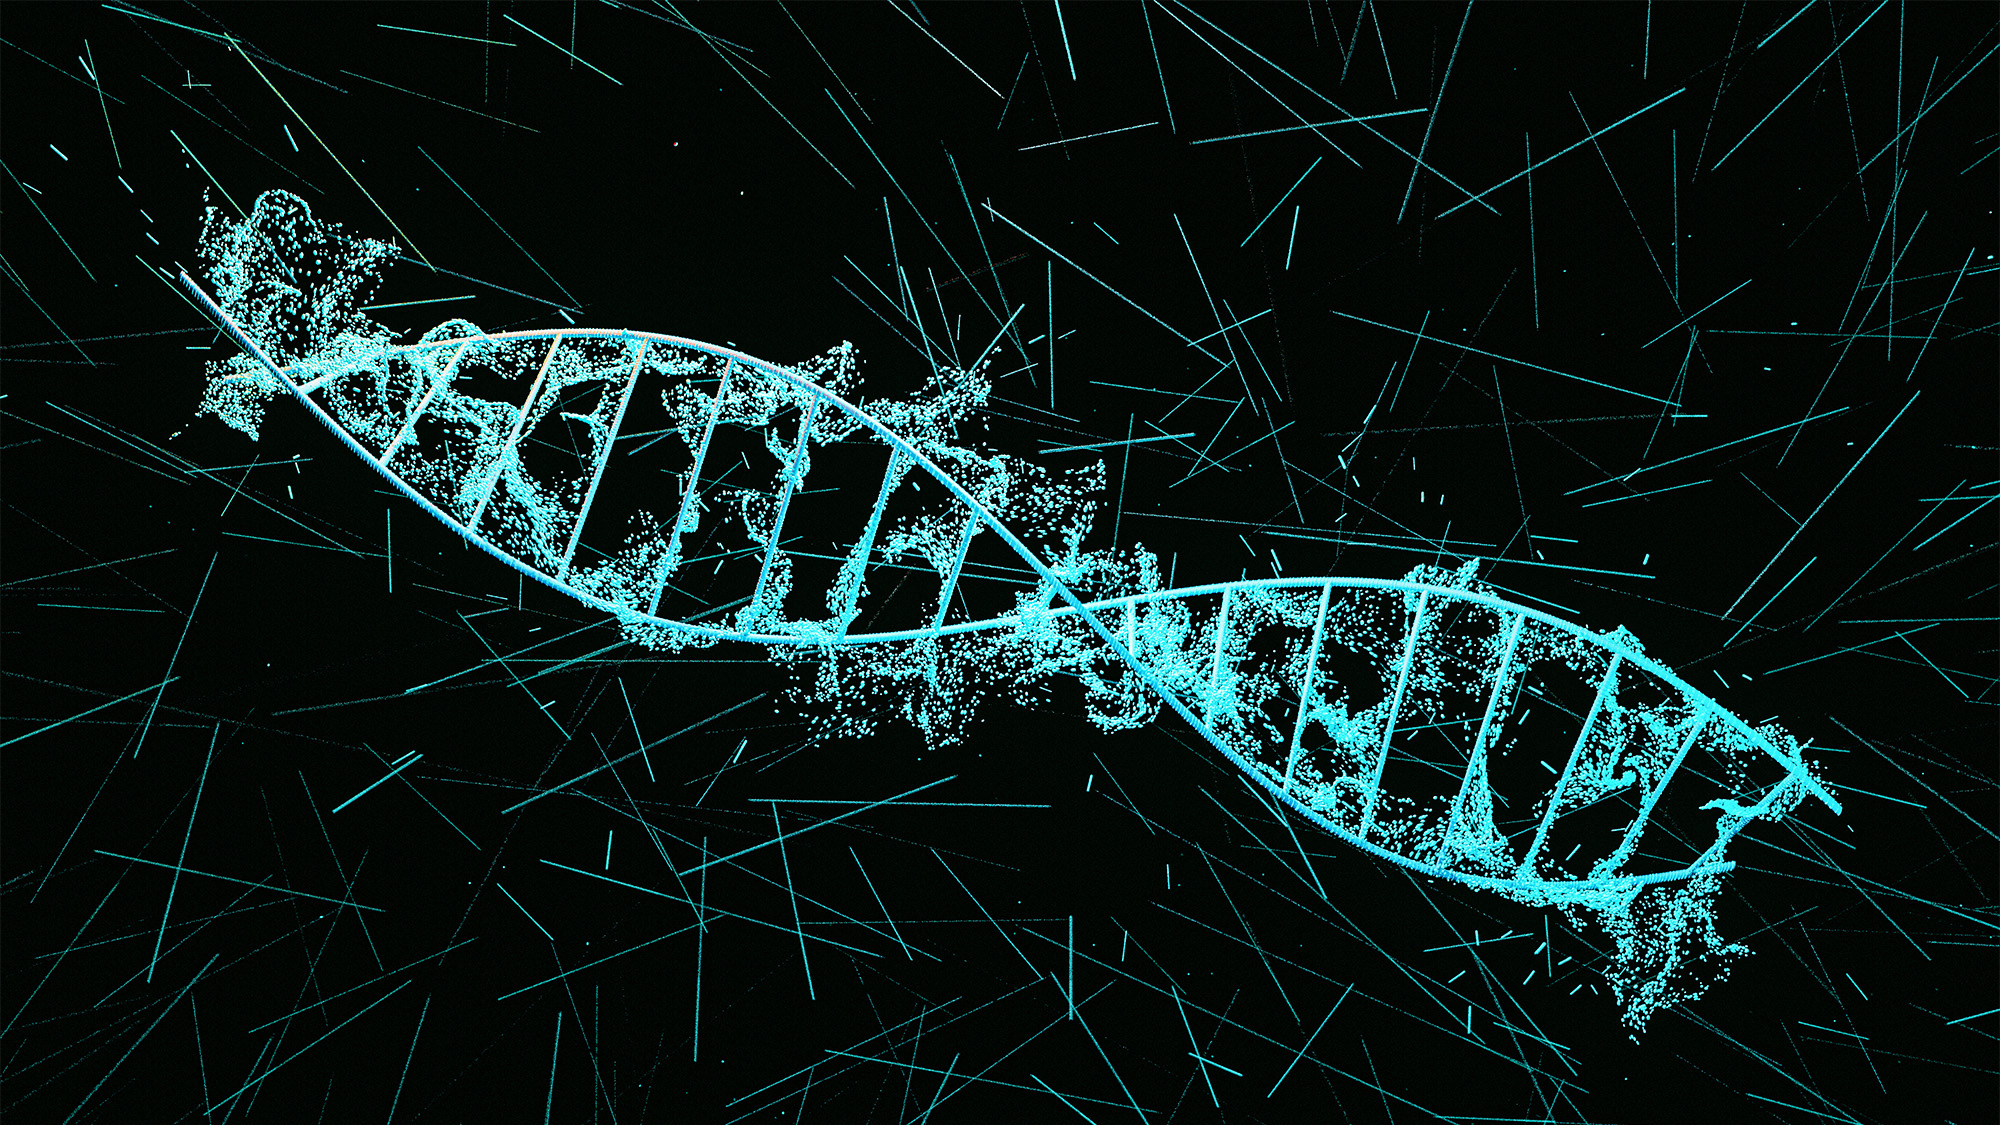 A computer illustration of a section of DNA